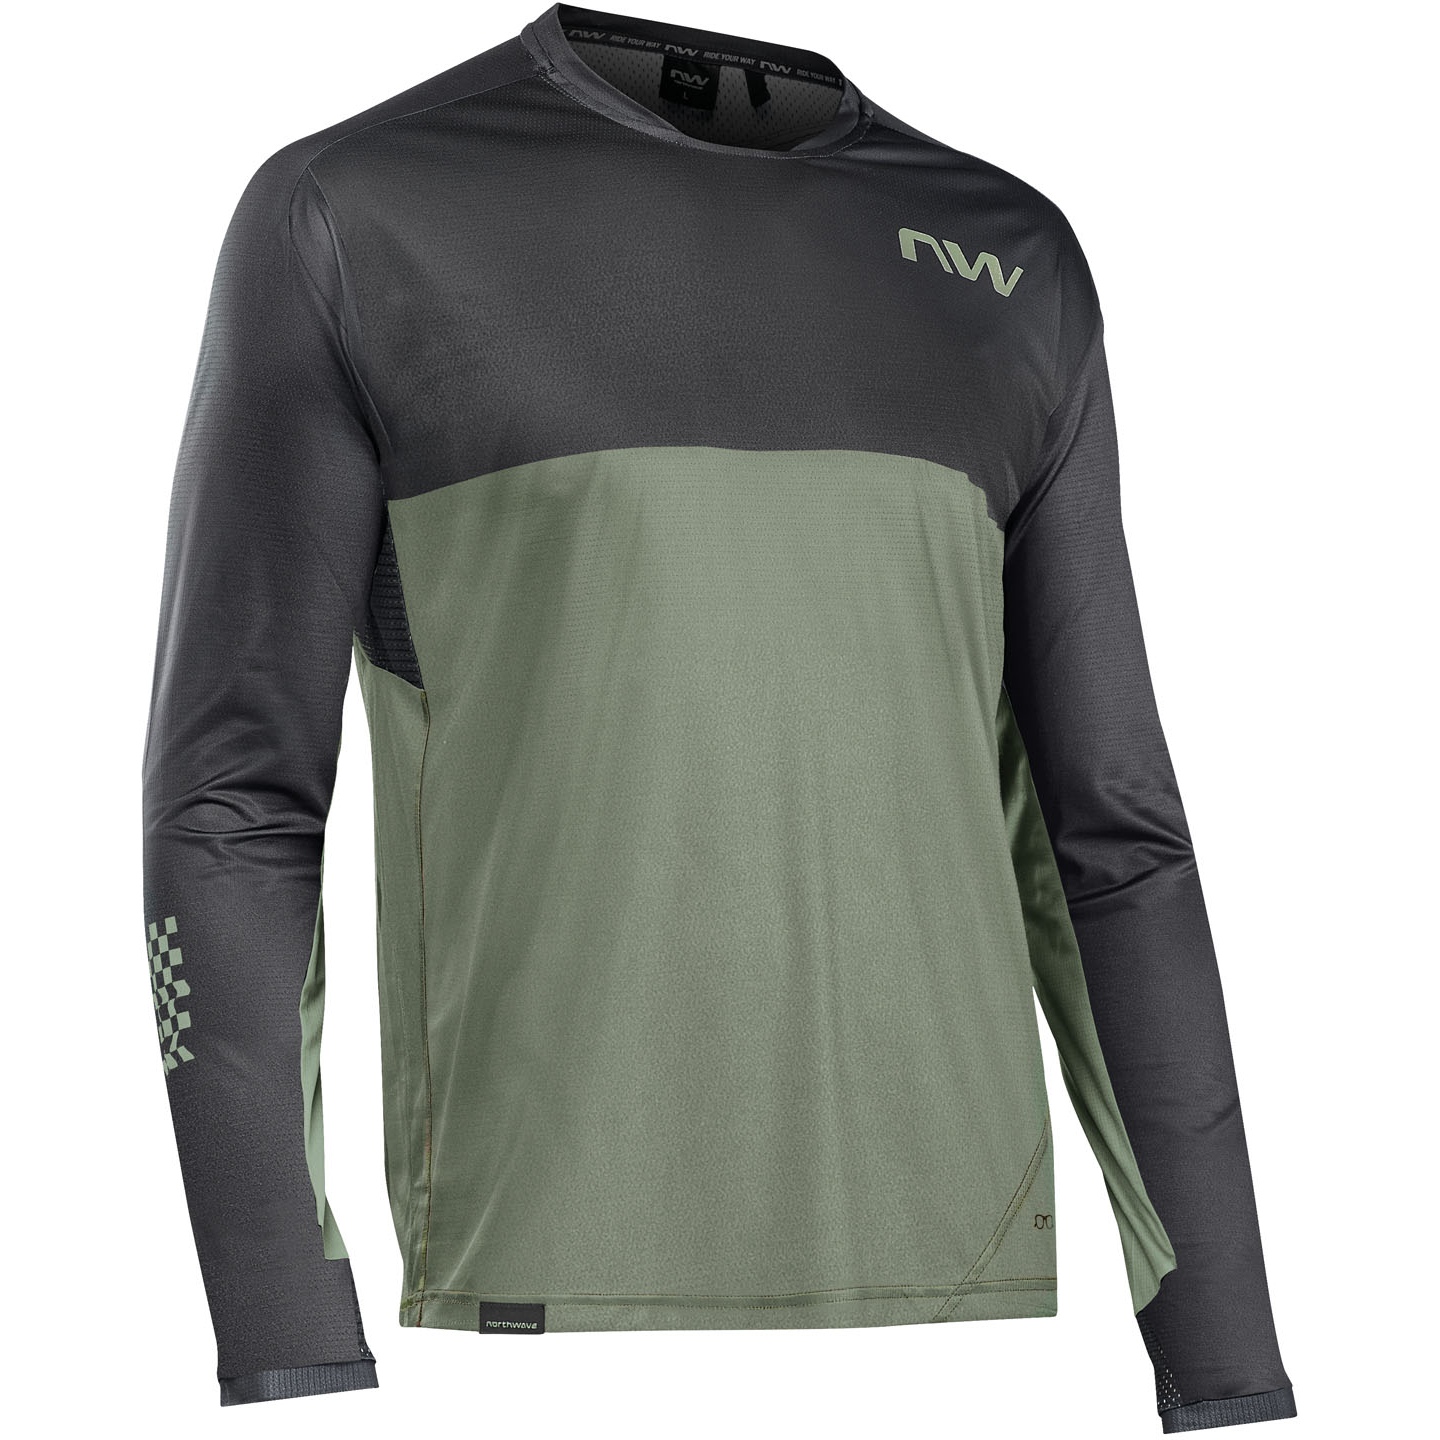 Picture of Northwave Edge Long Sleeve Jersey Men - black/forest green 02